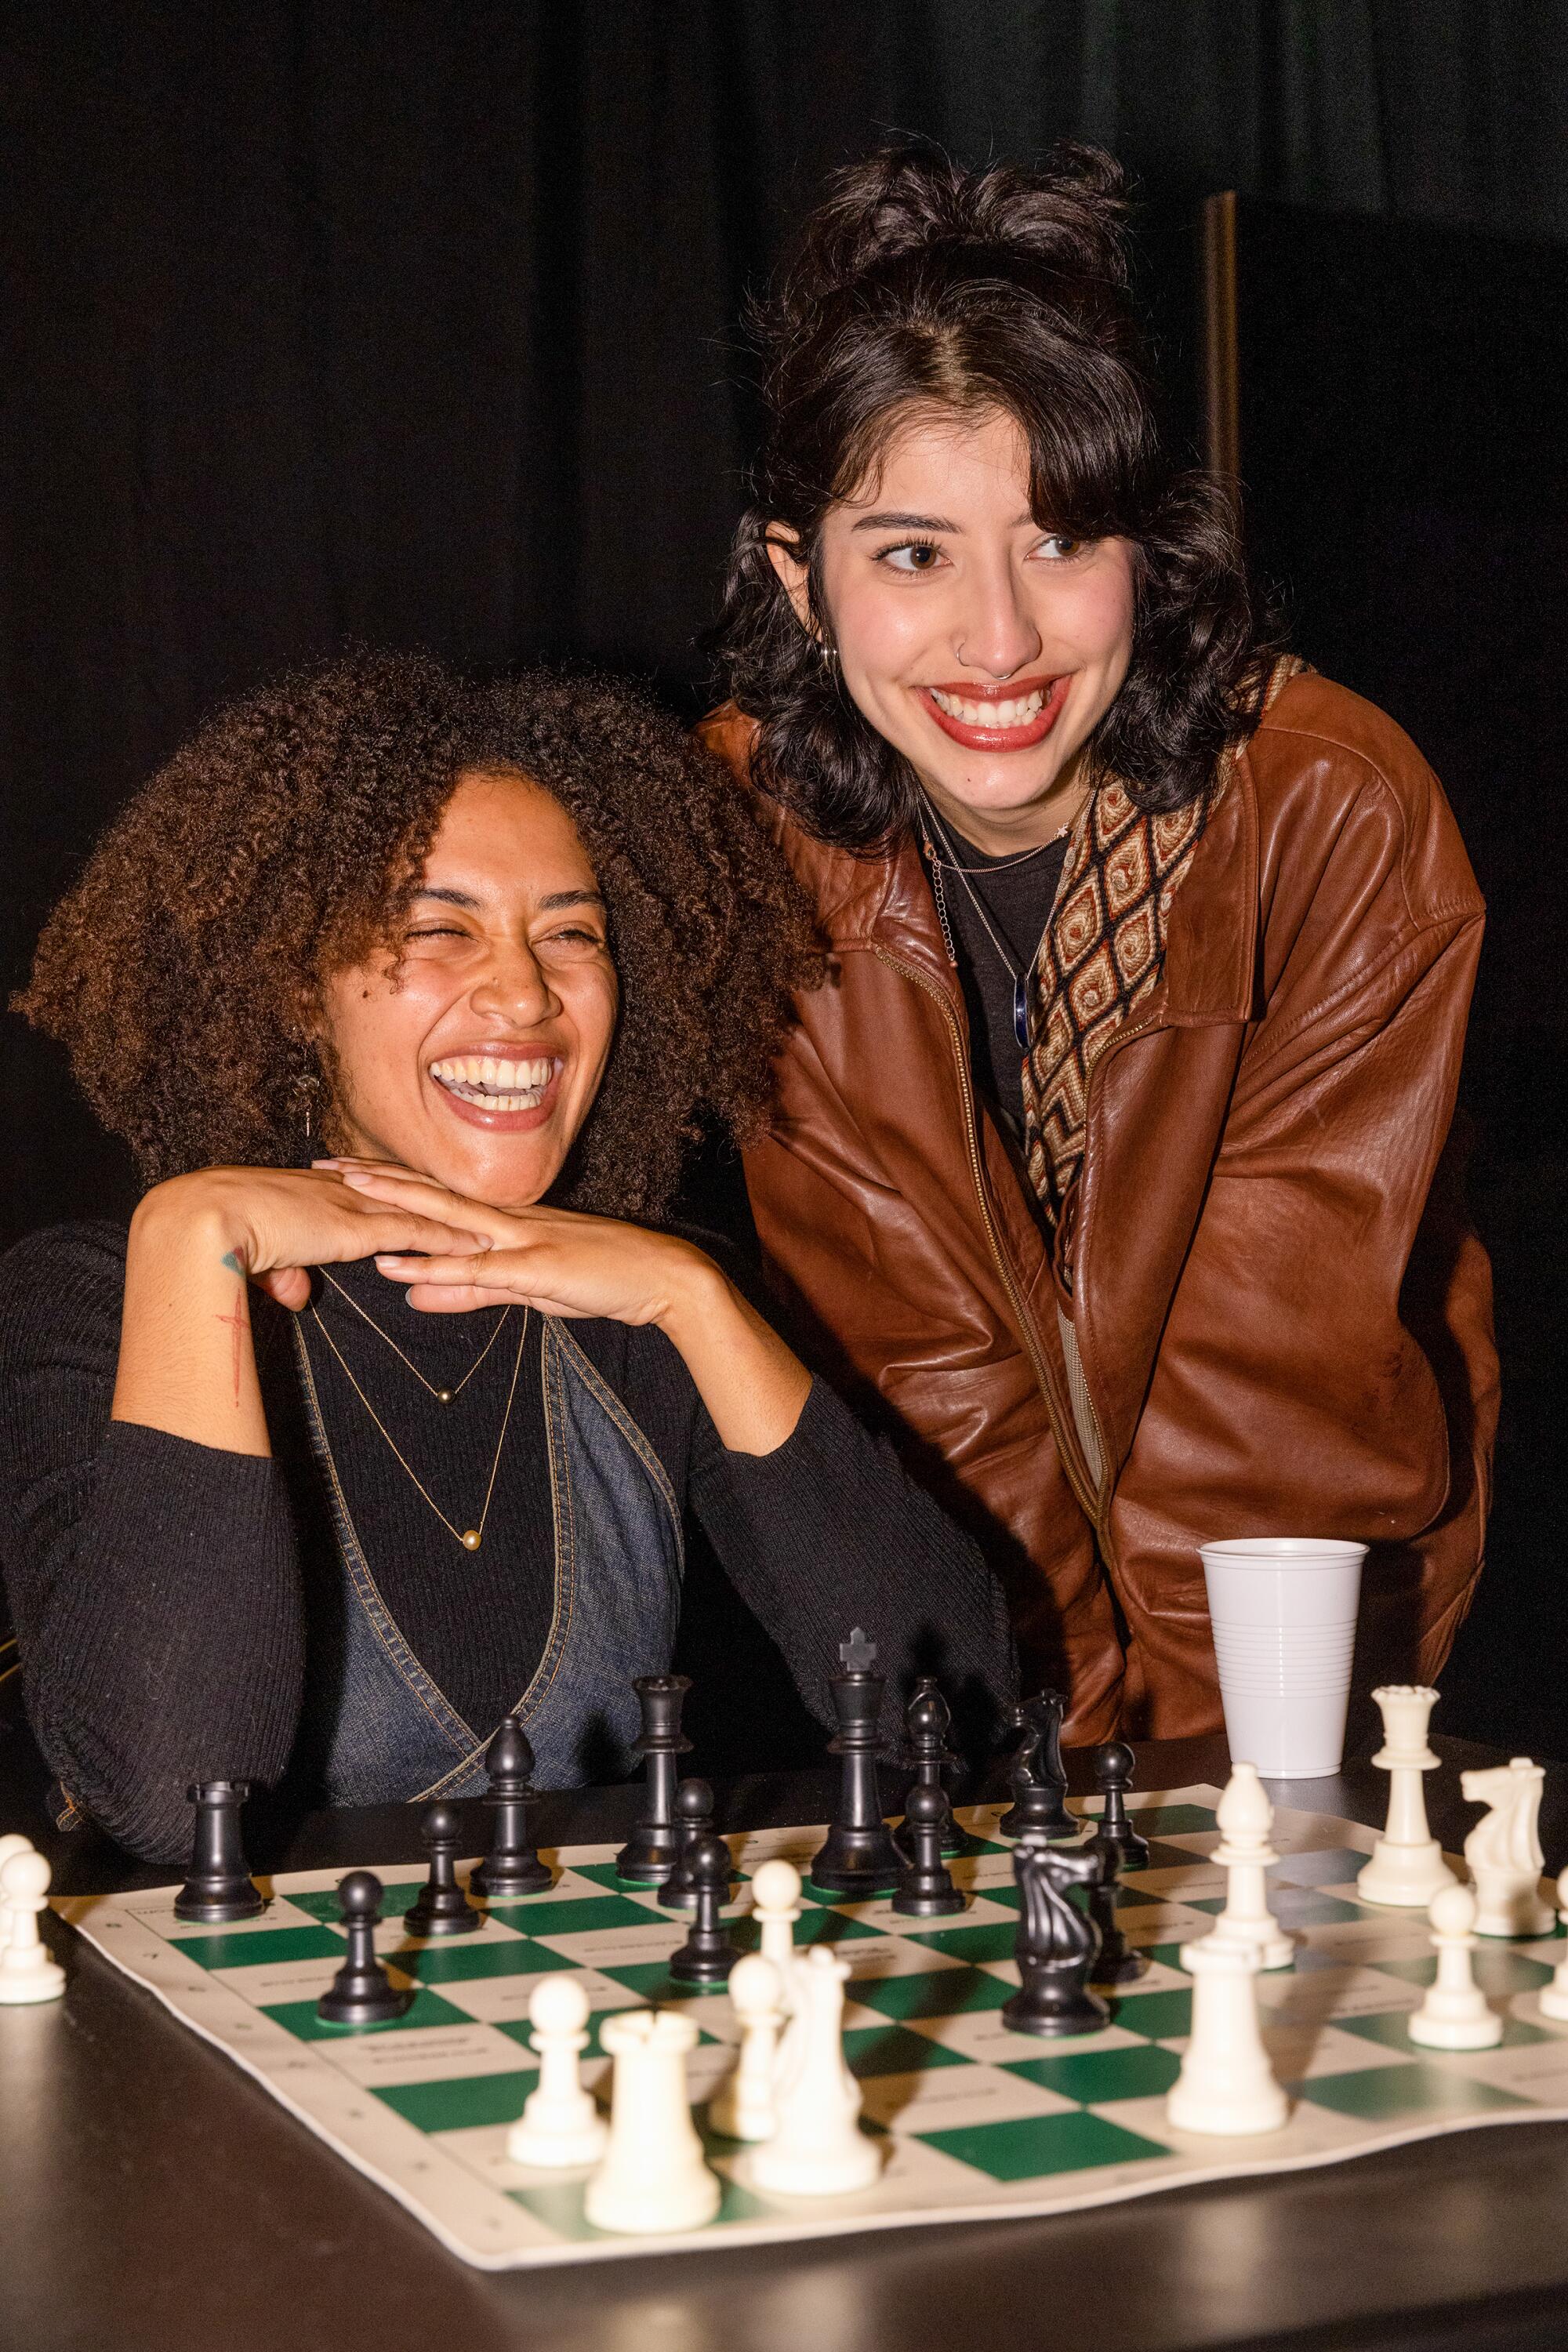 Two people play a game of chess together with new friends.